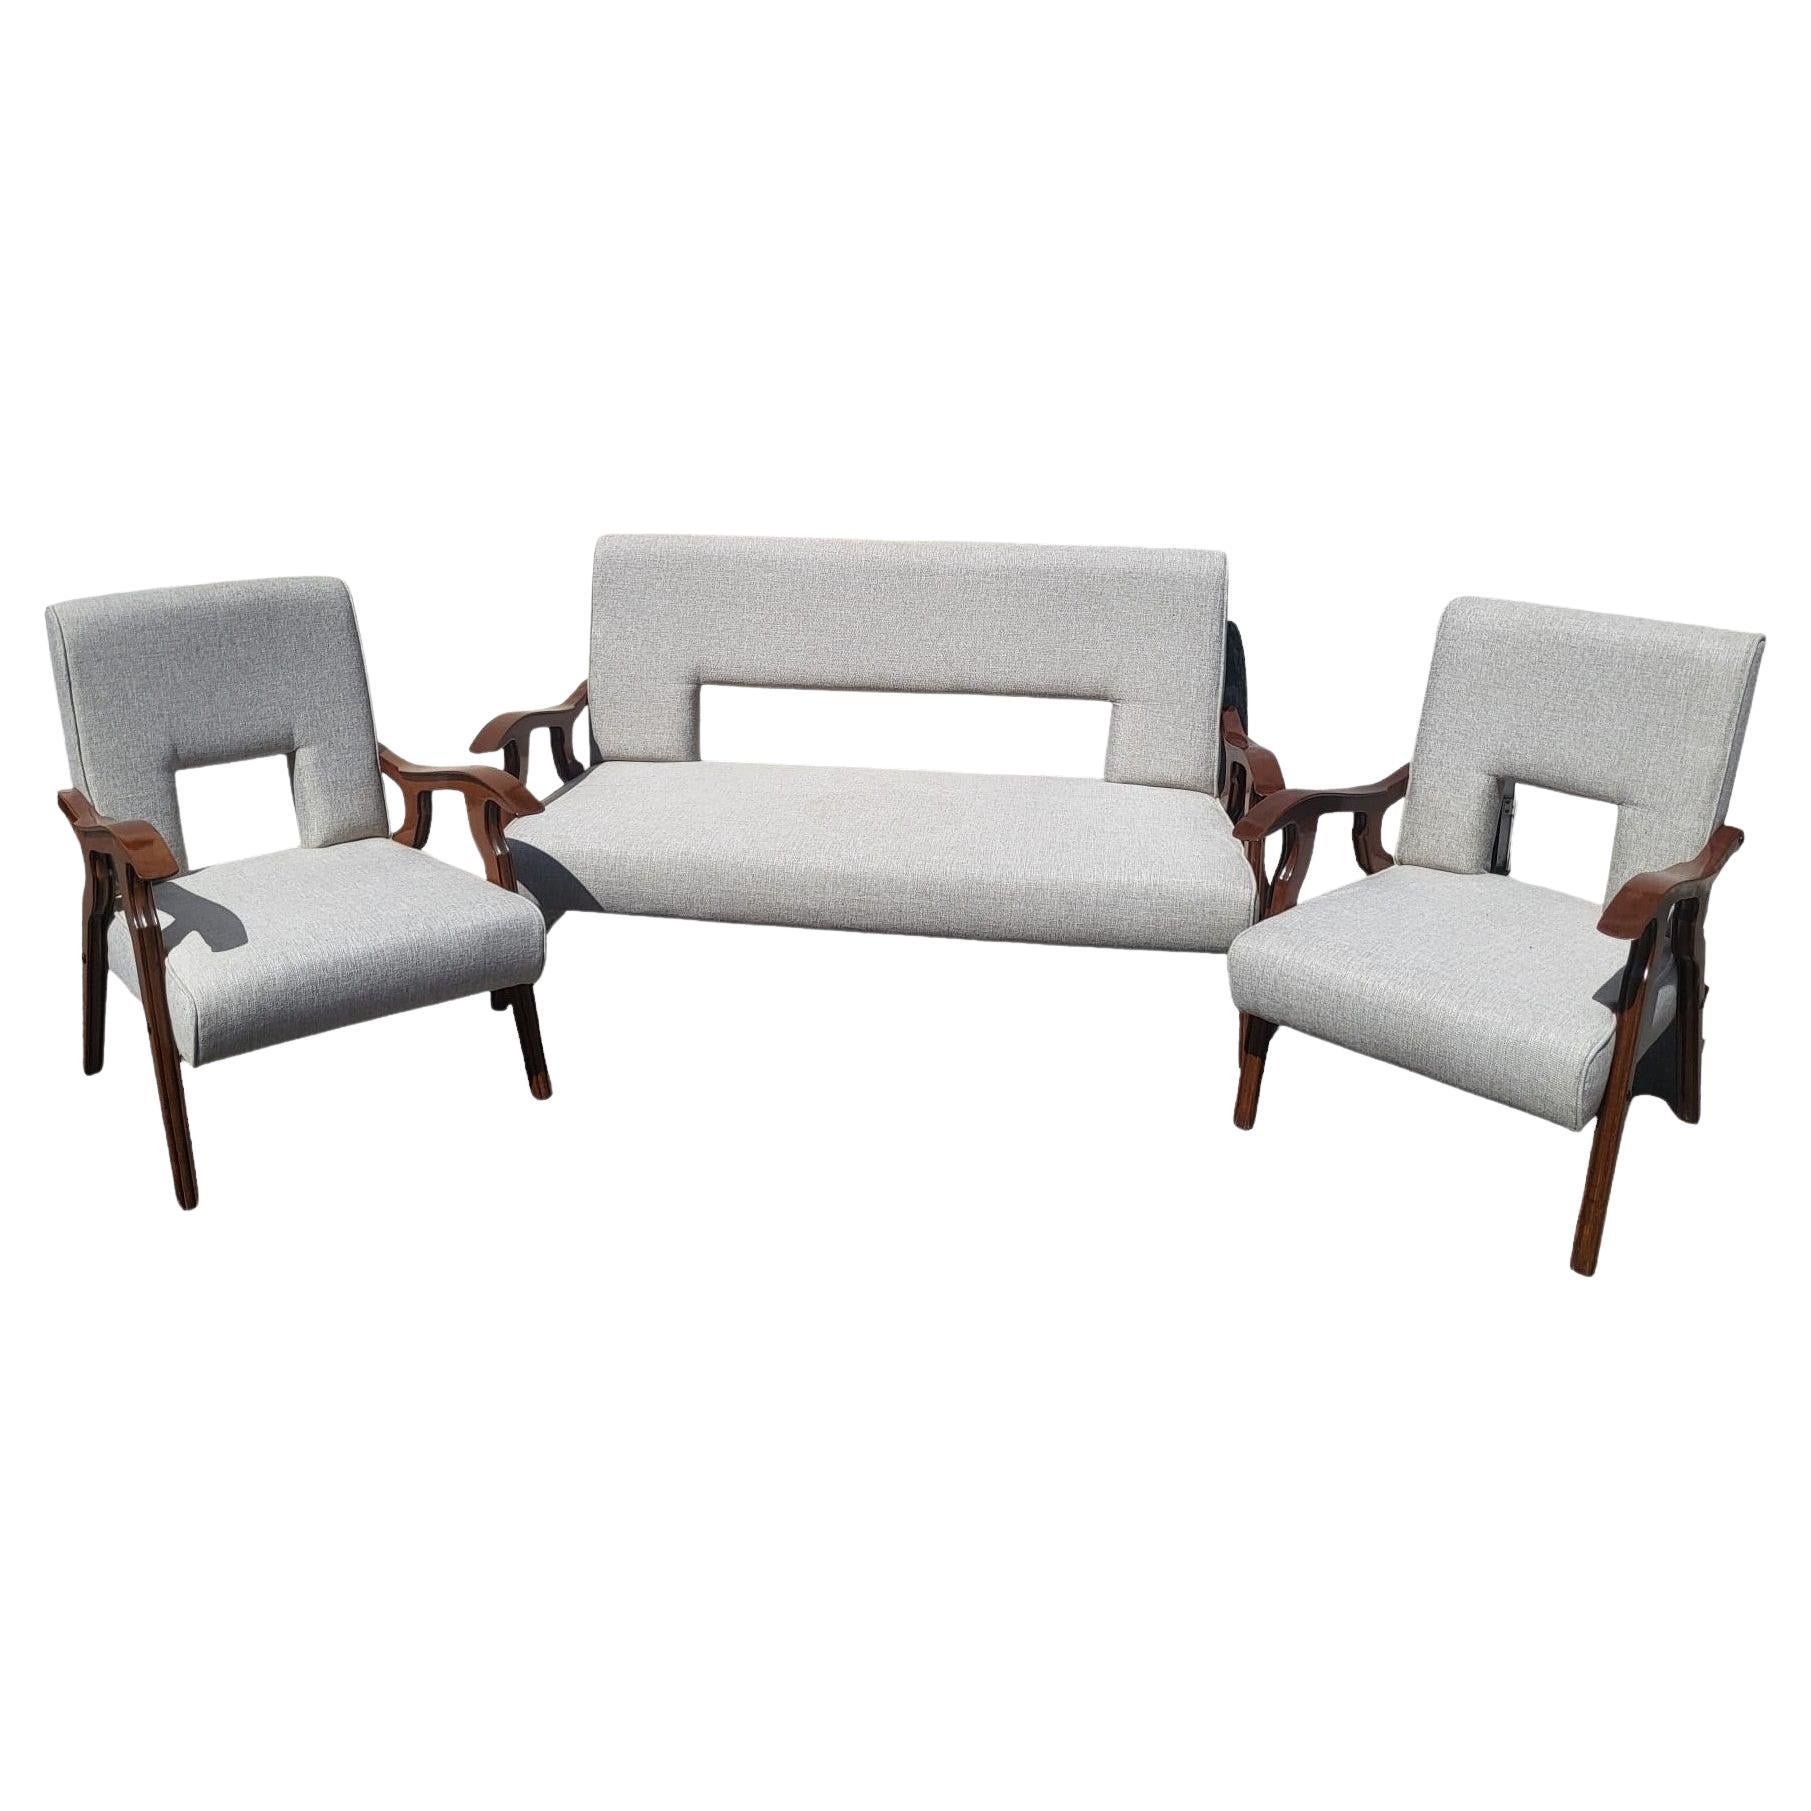 Living Room set 1 Sofa + 2 Armchairs, Design From The 70s, 20th Century For Sale